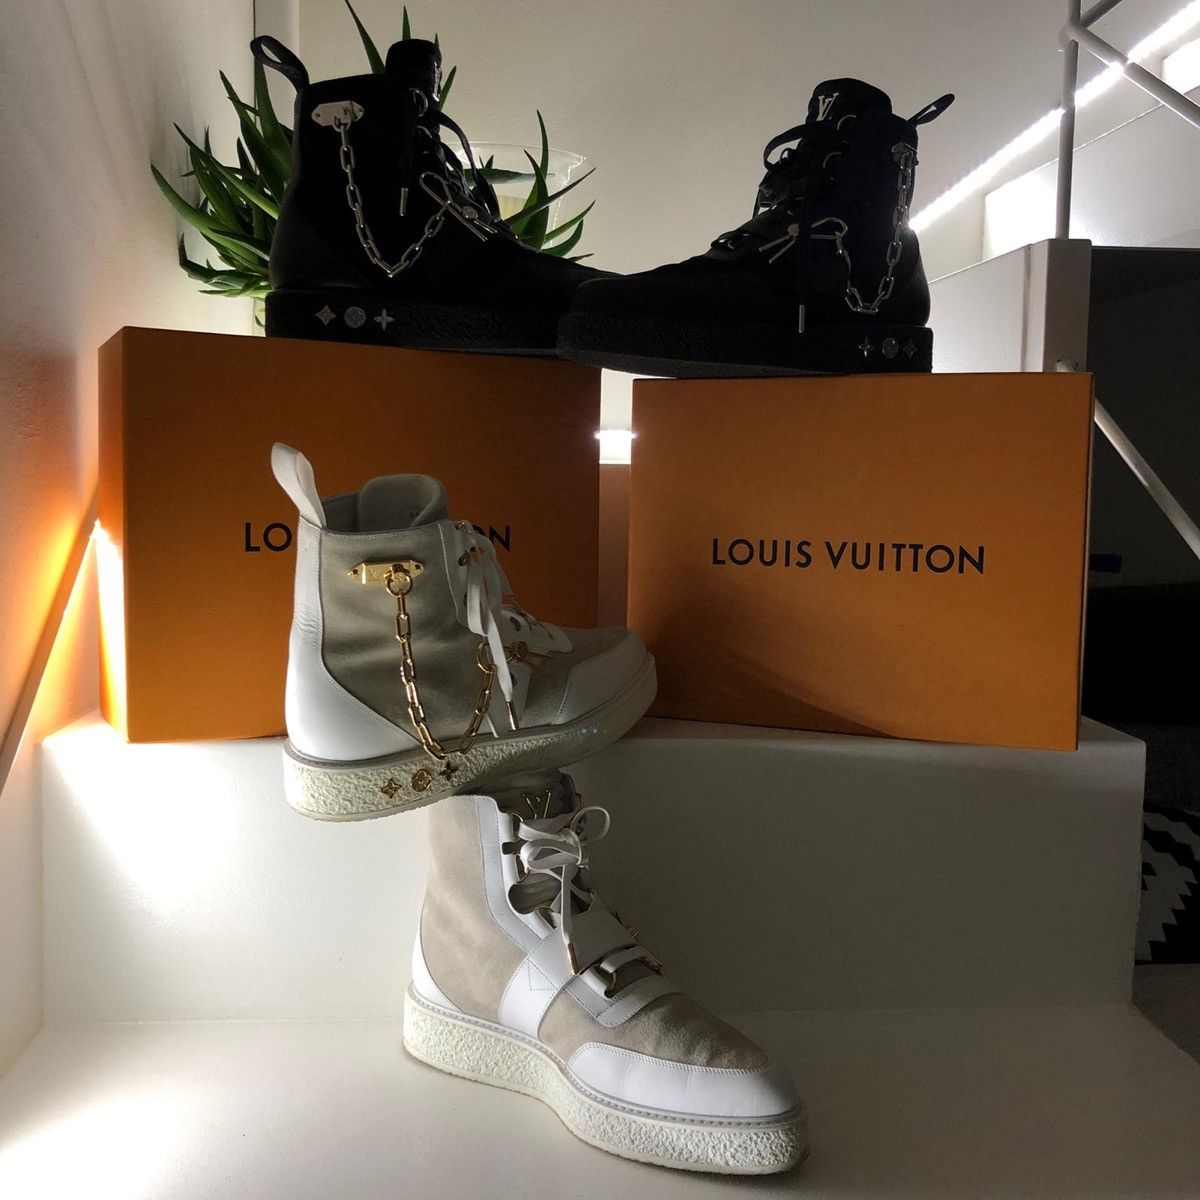 Louis Vuitton 'Creeper' Ankle Boots from Virgil Abloh's Debut LV colle